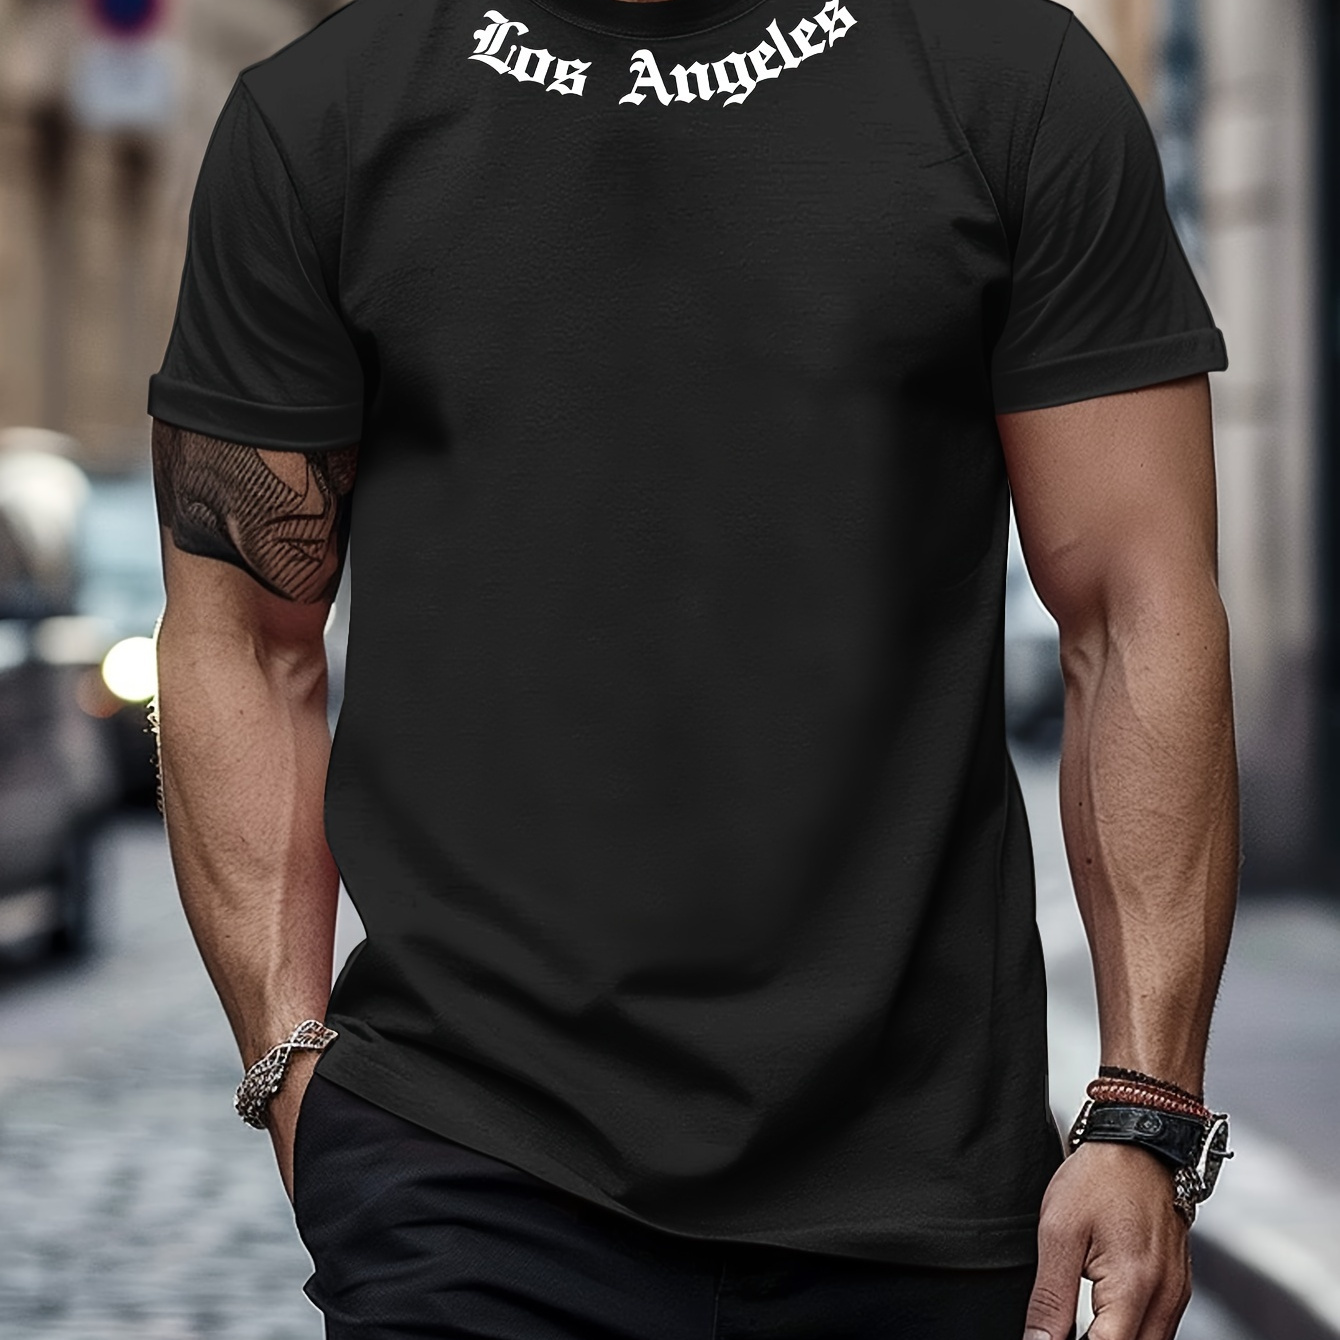 

Los Angeles Print Men's Round Neck Short Sleeve Tee Fashion Regular Fit T-shirt Top For Spring Summer Holiday